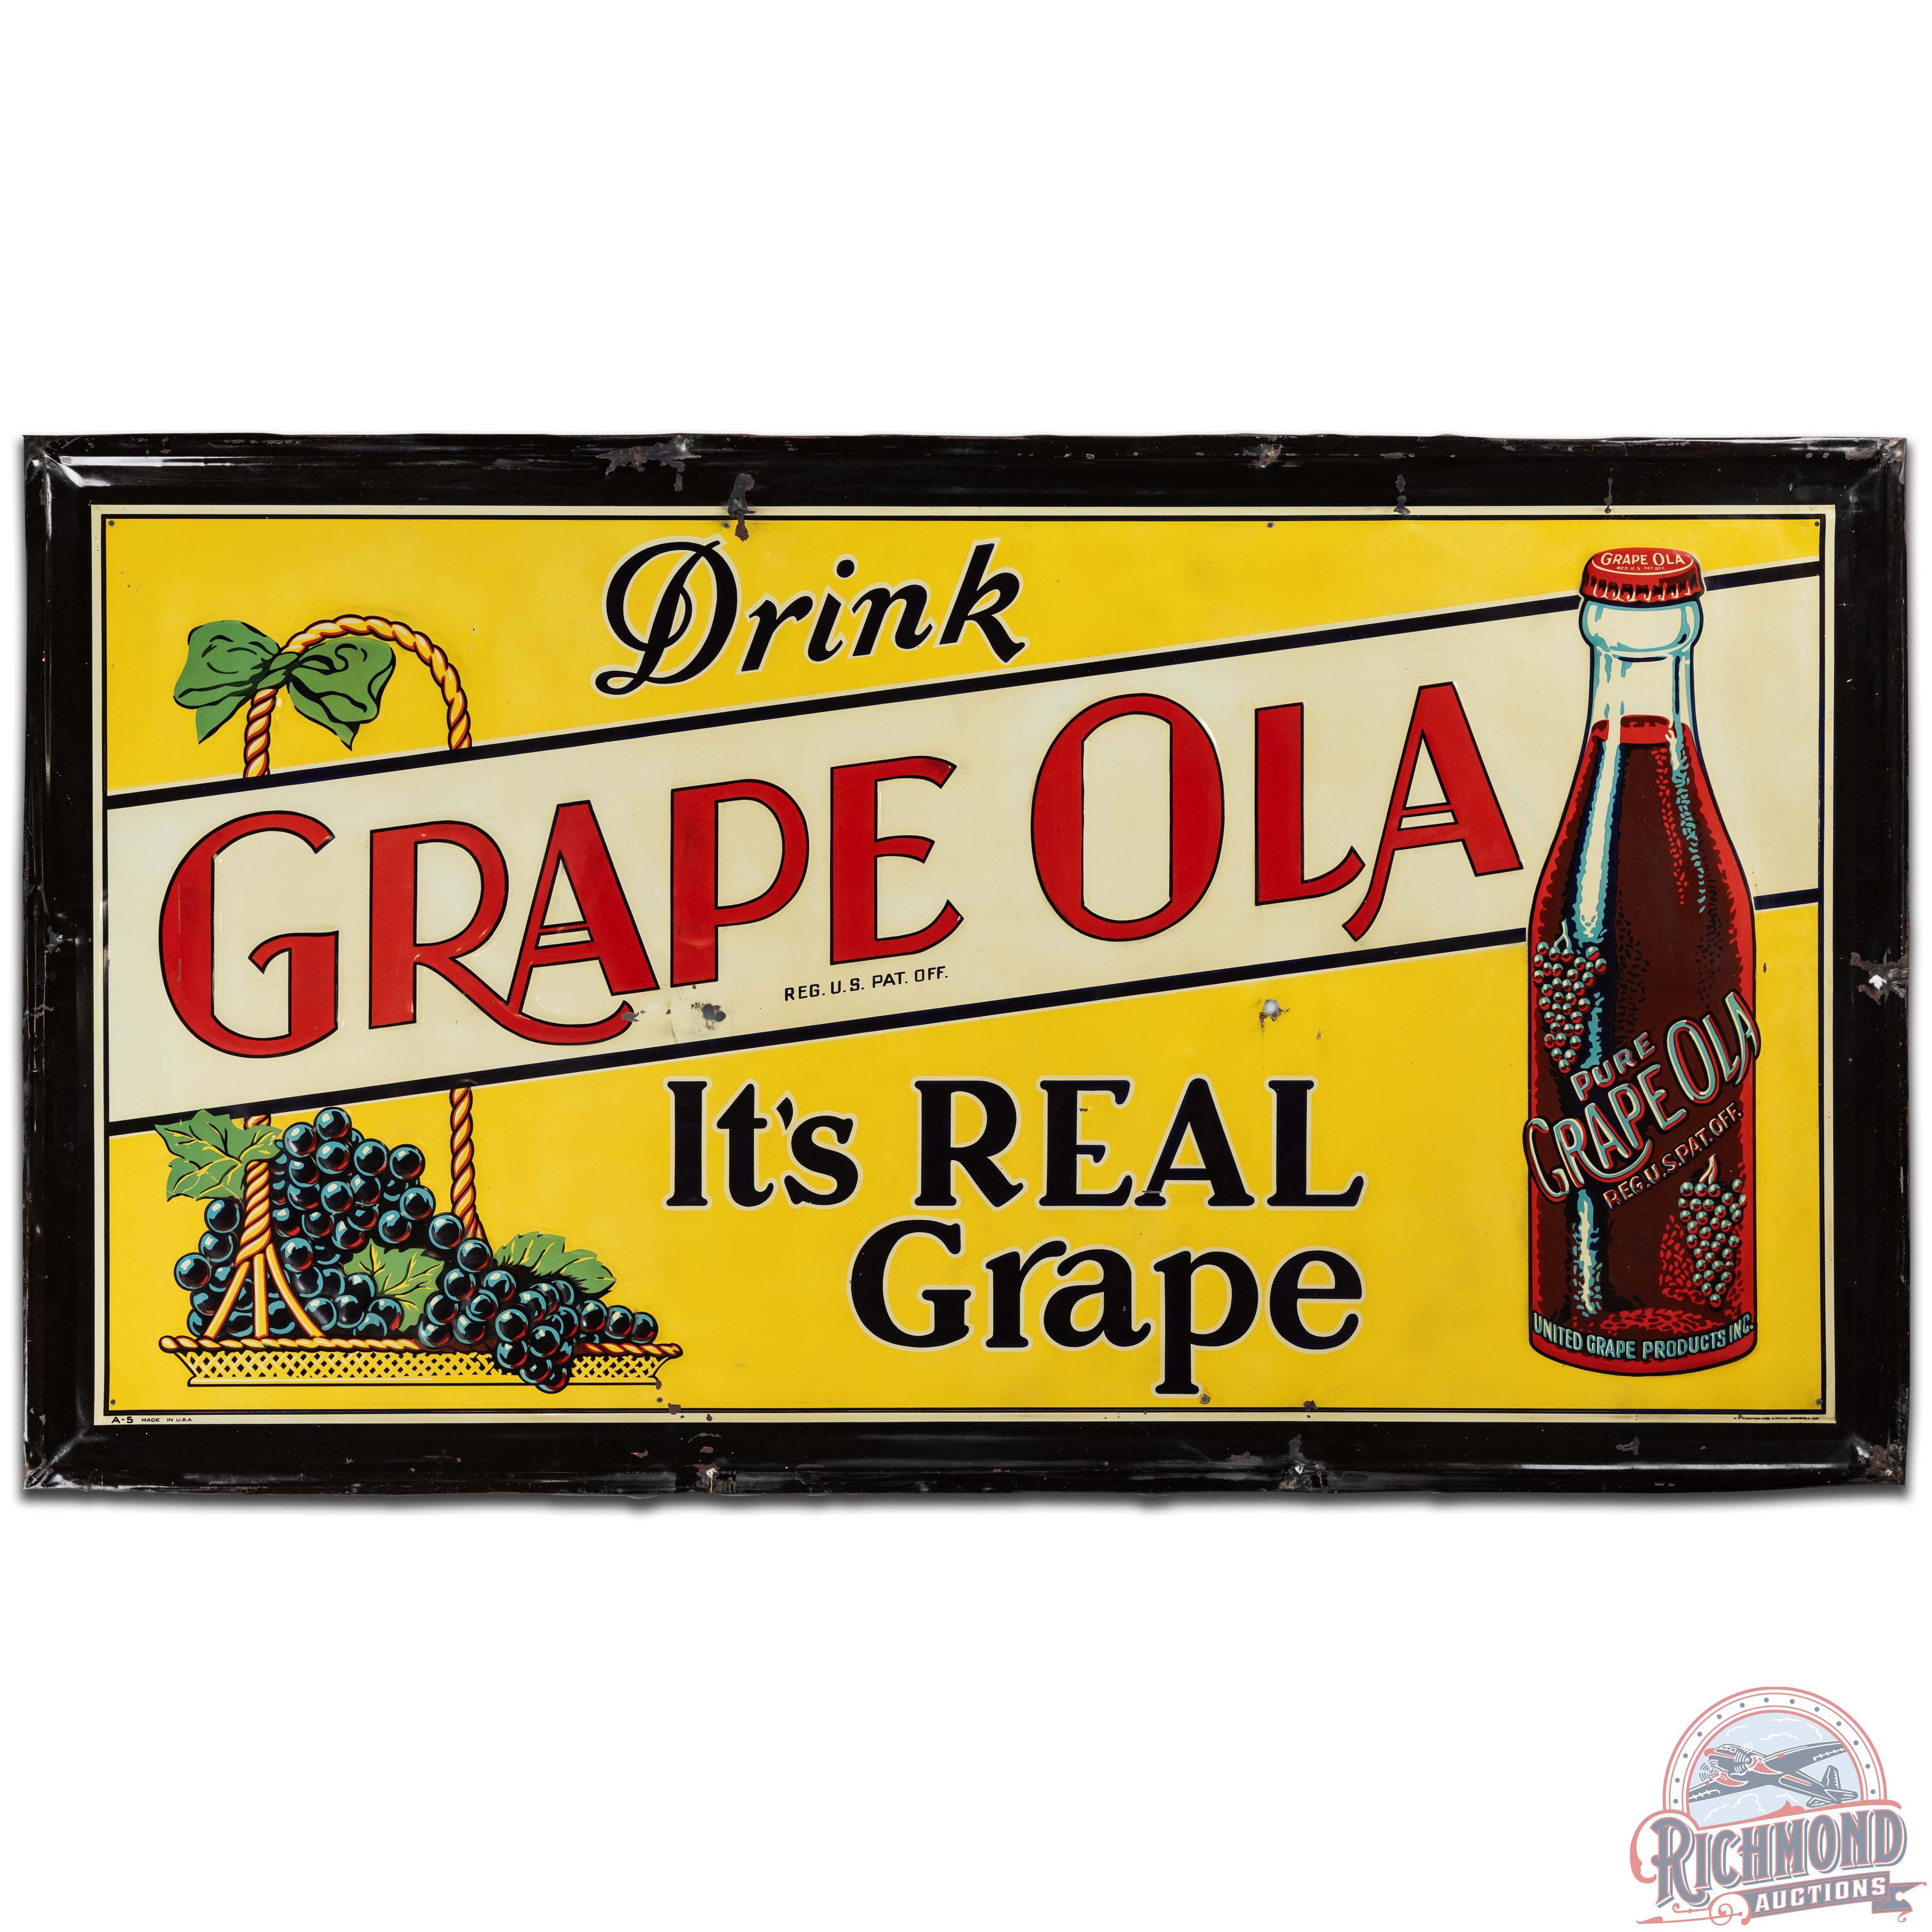 Drink Grape Ola It's Real Grape Embossed SS Tin Sign w/ Bottle